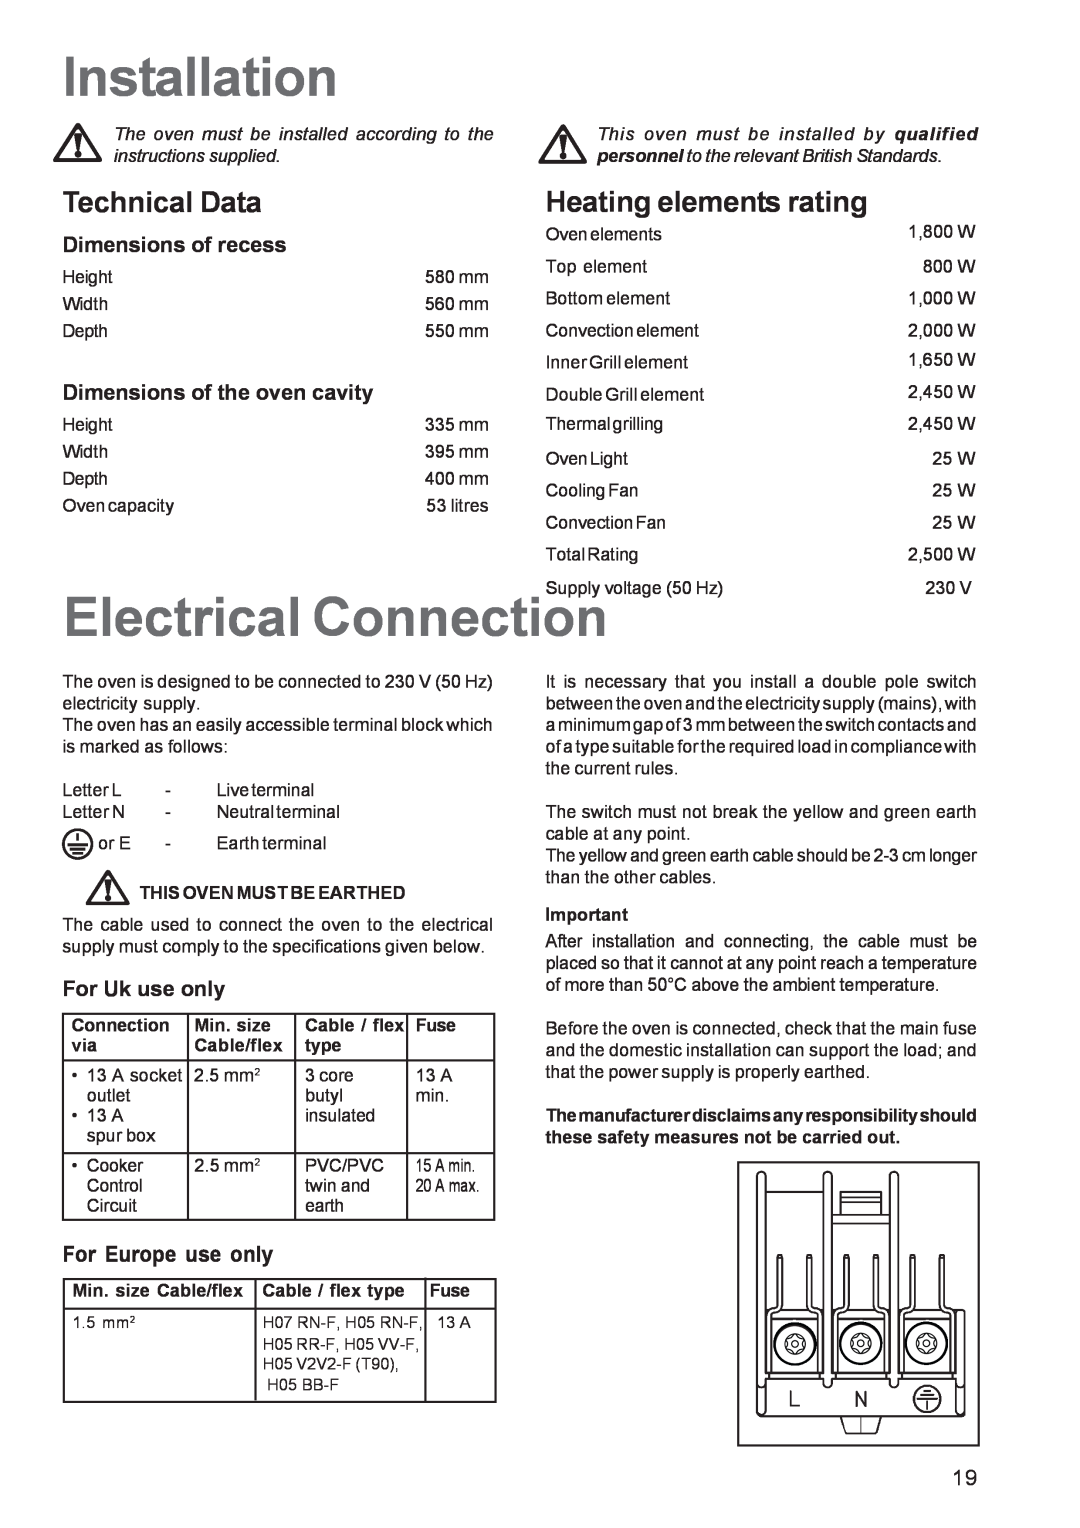 Zanussi ZBS863 Installation, Electrical Connection, Technical Data, Heating elements rating, Dimensions of recess, Fuse 